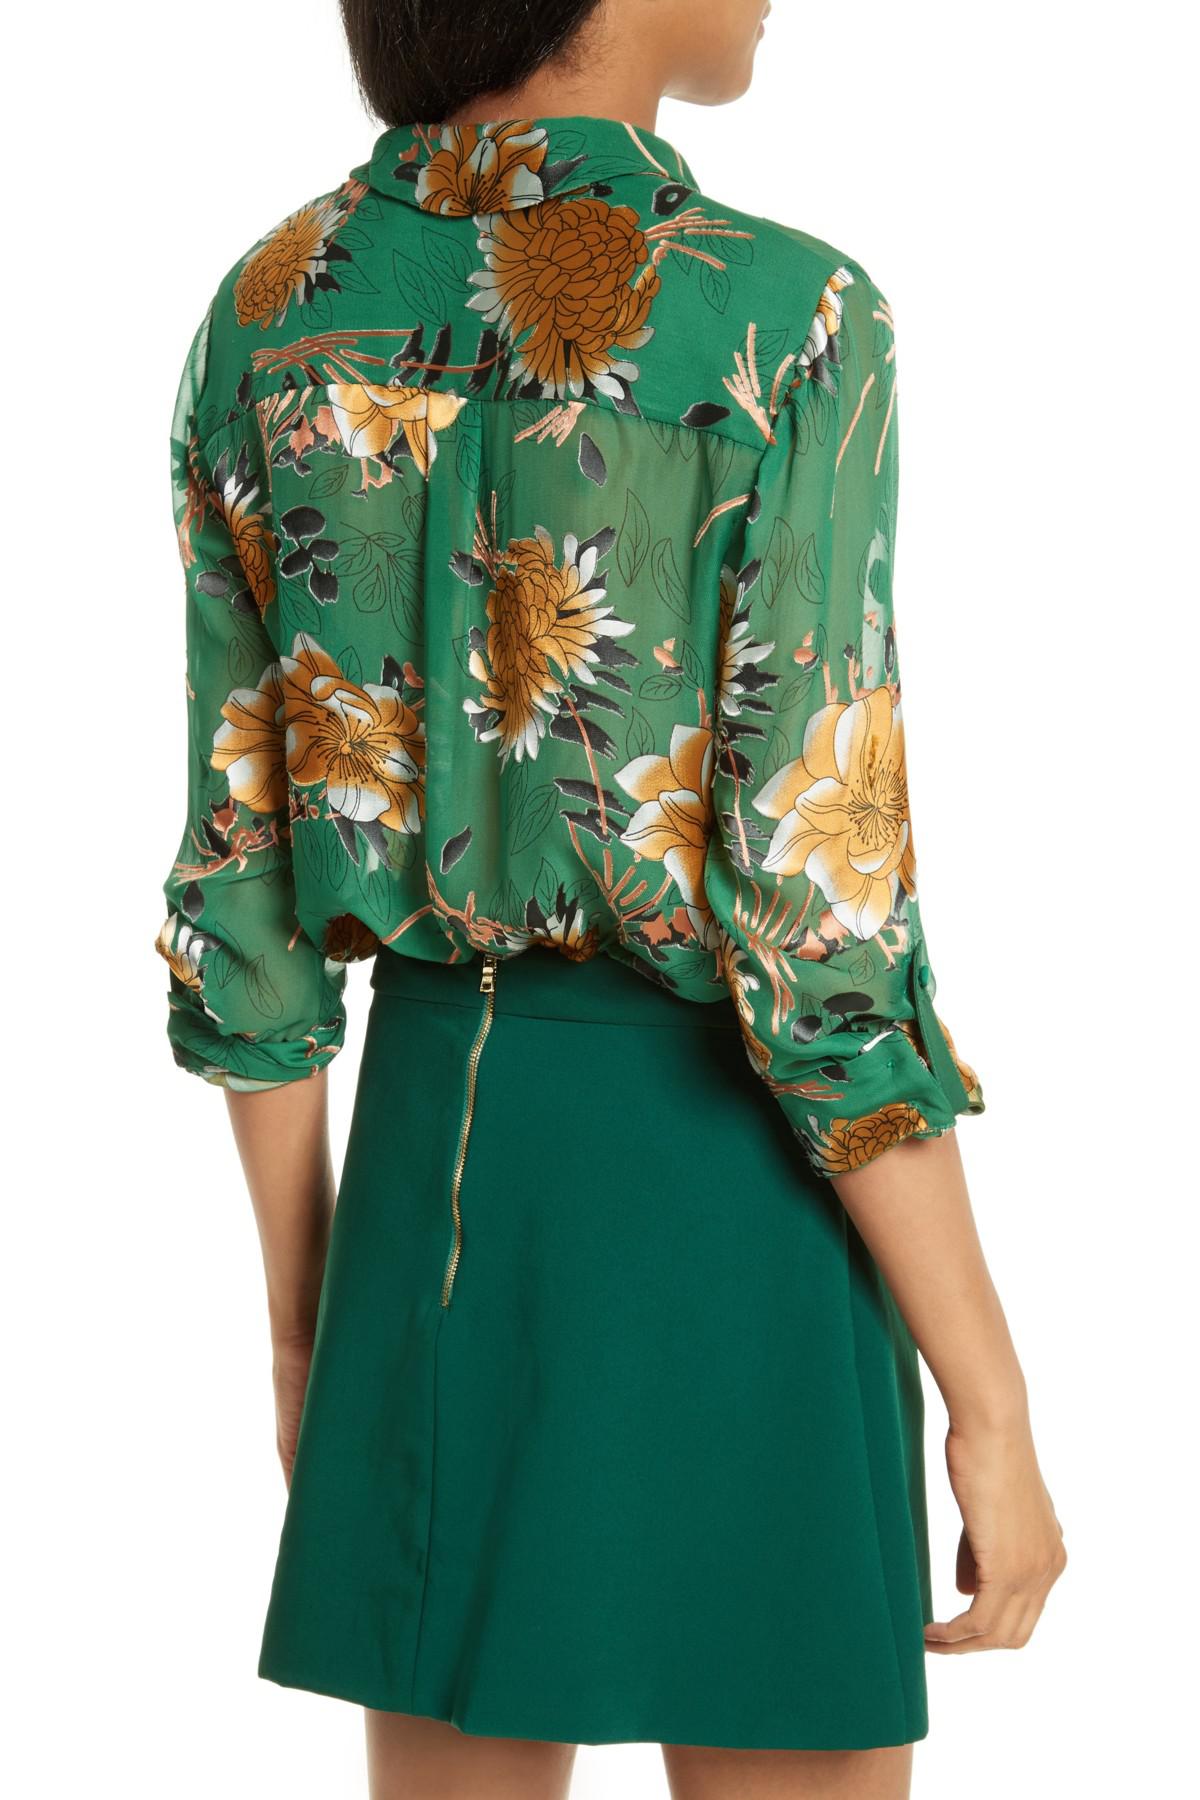 Alice + Olivia Eloise Roll Sleeve Floral Blouse in Green - Lyst